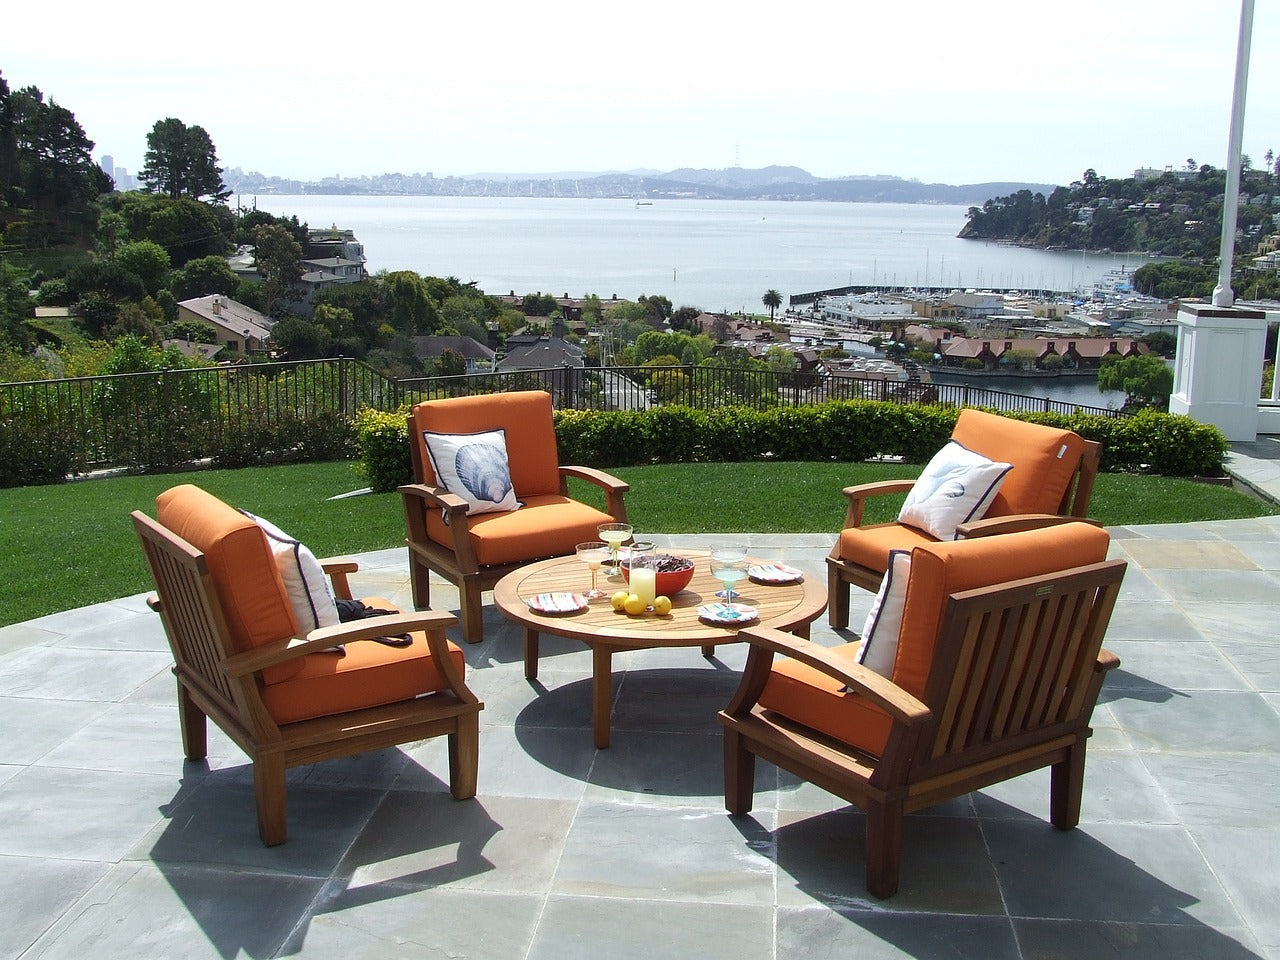 How Do I Protect My Outdoor Furniture From UV? Practical Tips for Longevity